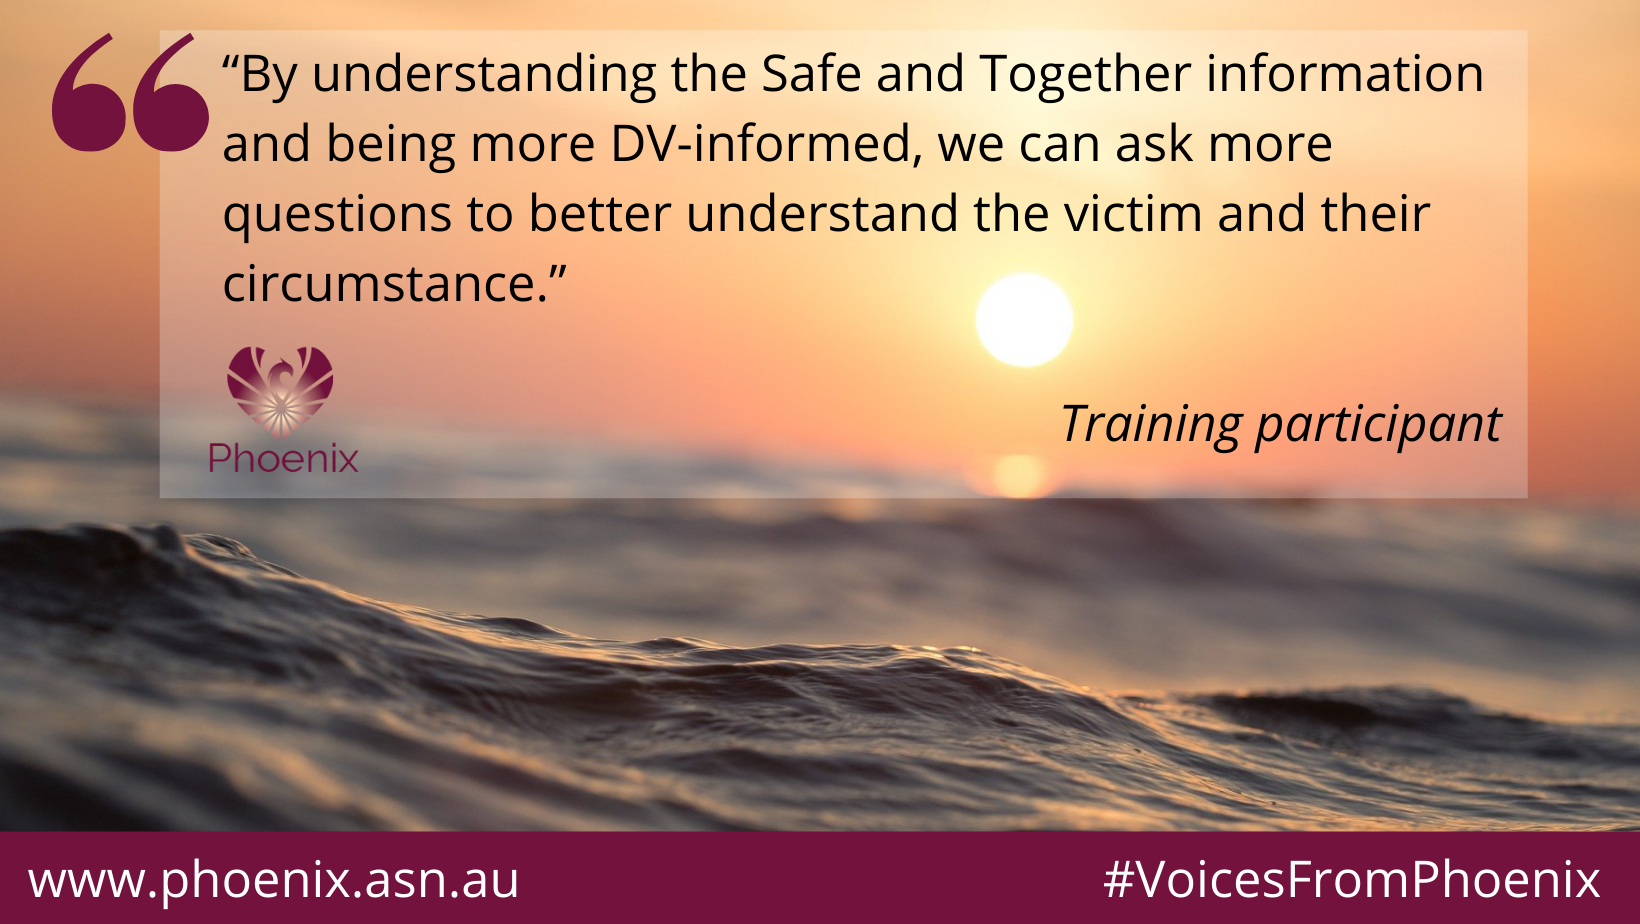 A picture with text overset. The quote is from a training participant that reads: We can ask more questions to better understand the victim and their circumstances.